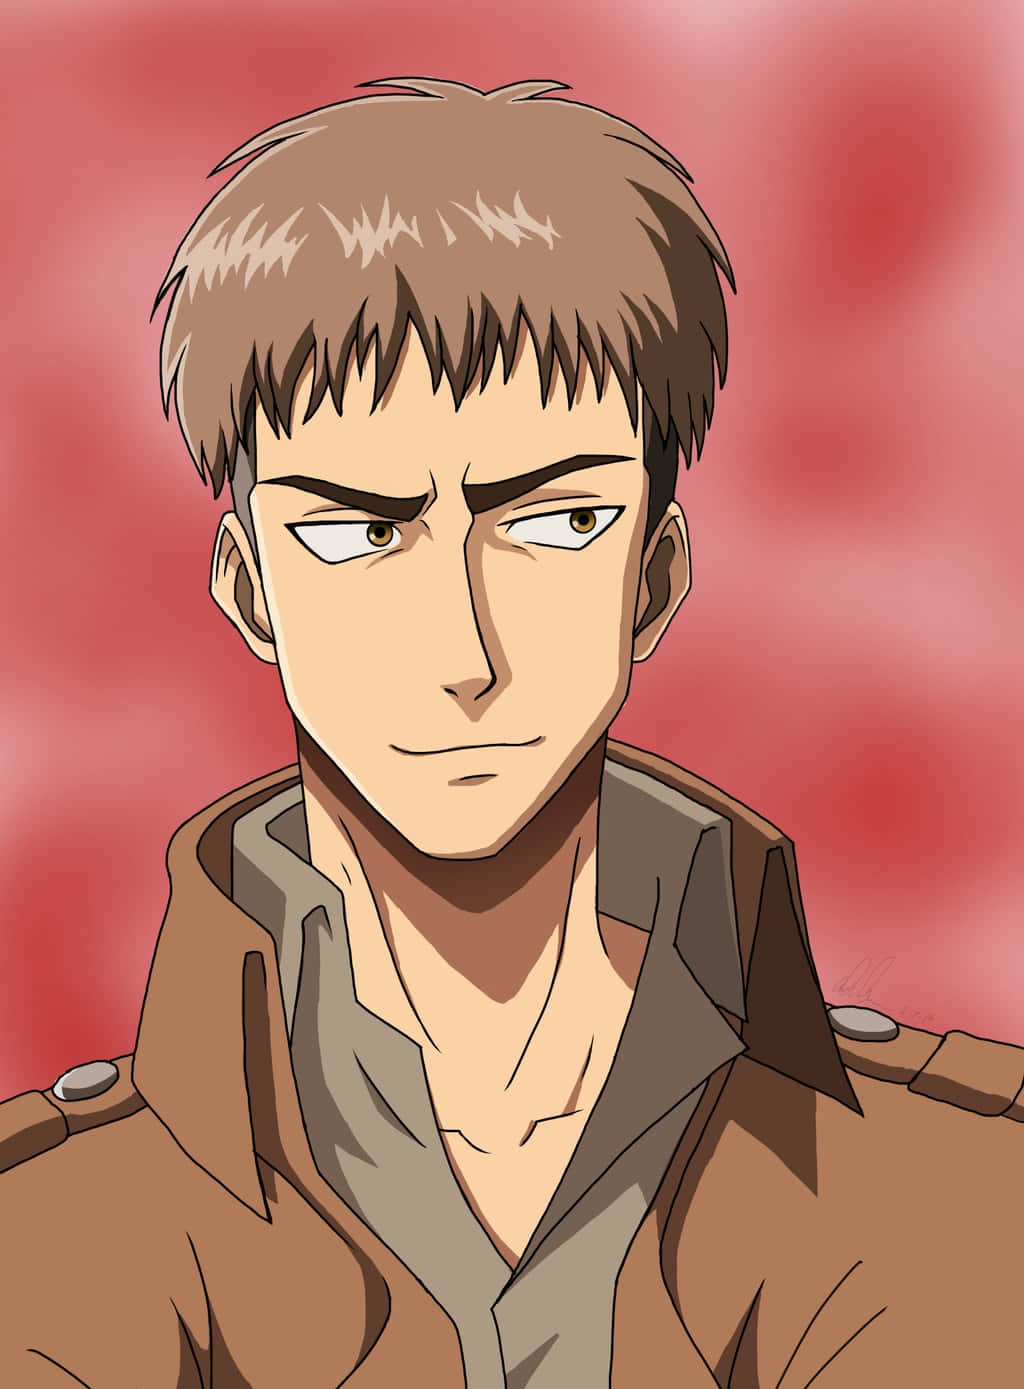 The ambitious Jean Kirstein Wallpaper